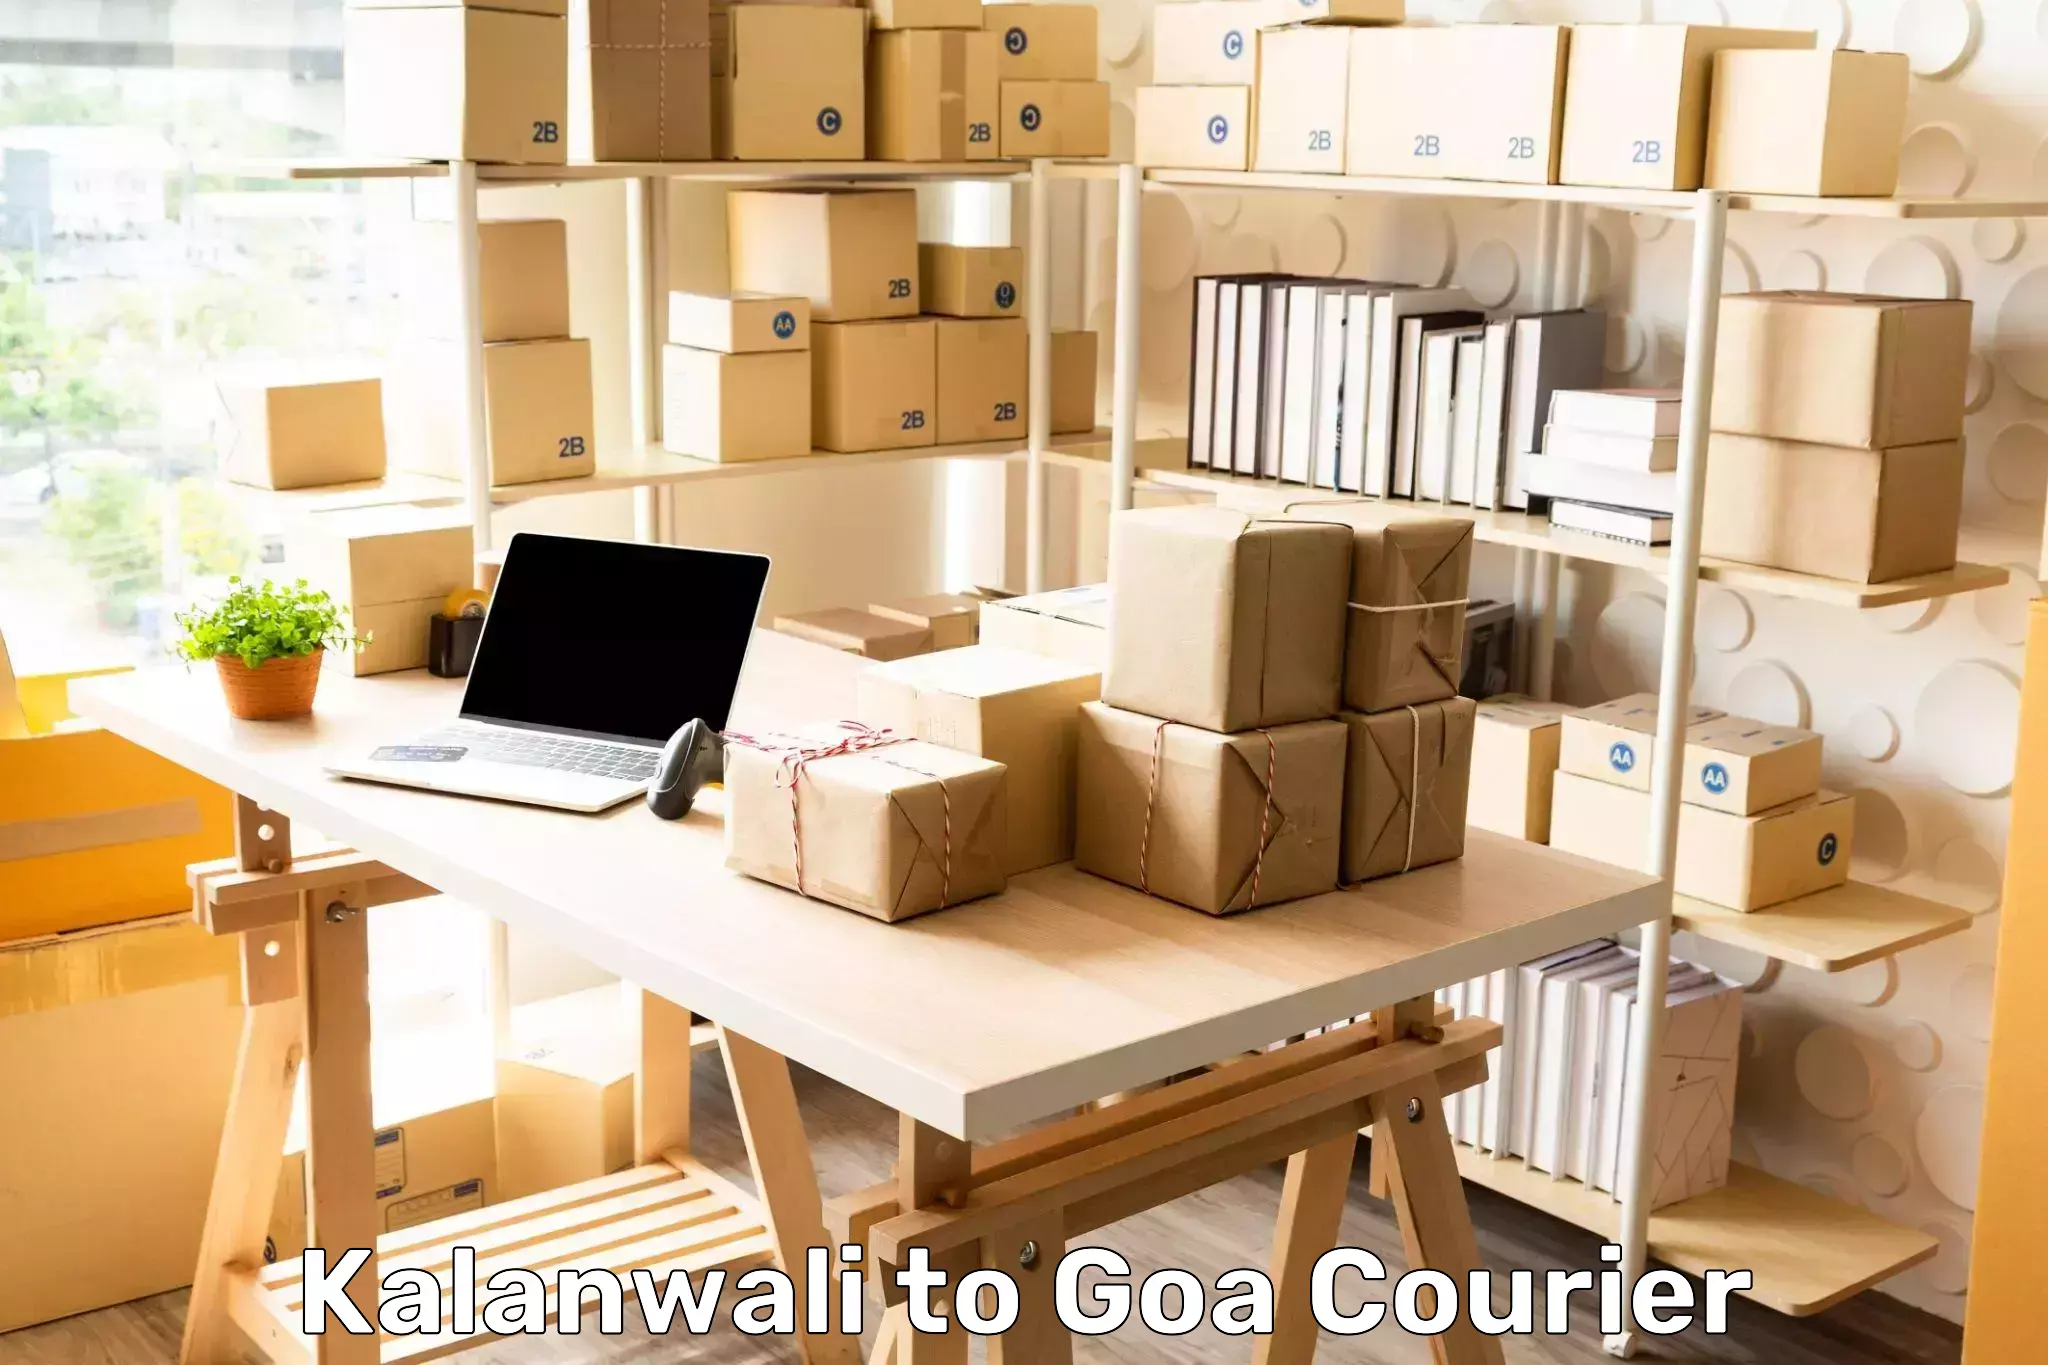 Enhanced tracking features in Kalanwali to Goa